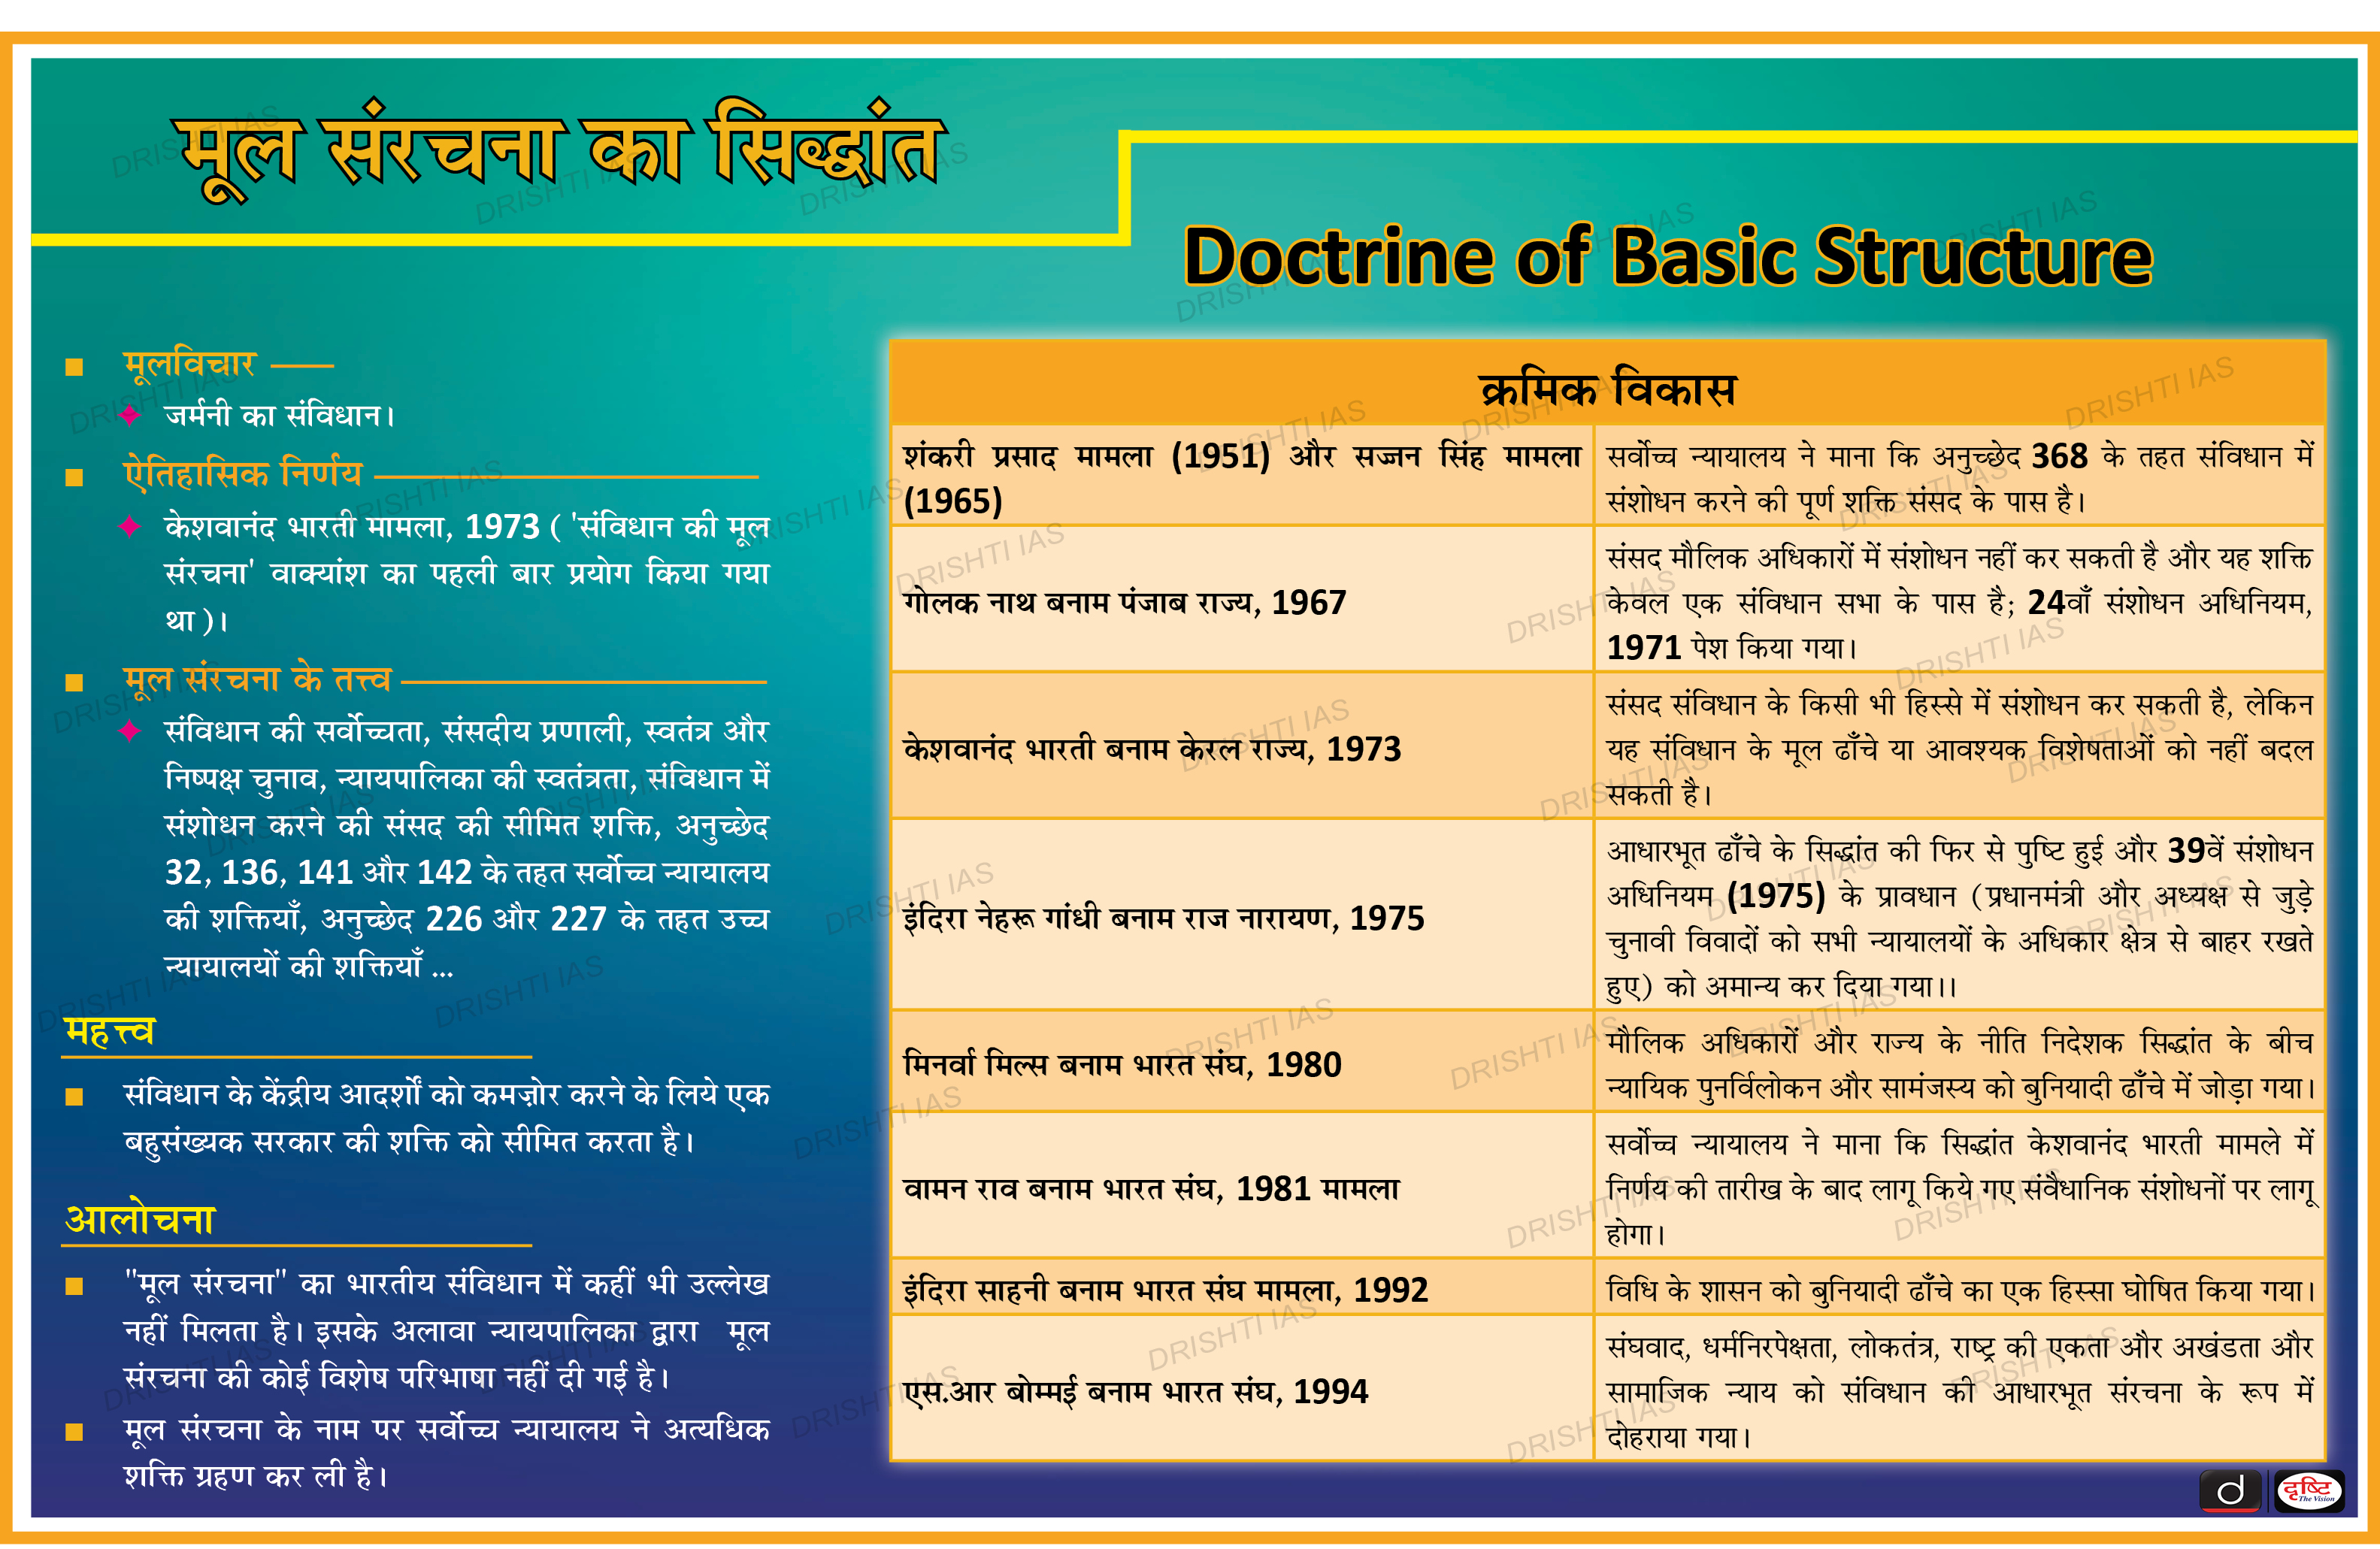 Doctrine-of-Basic-Structure